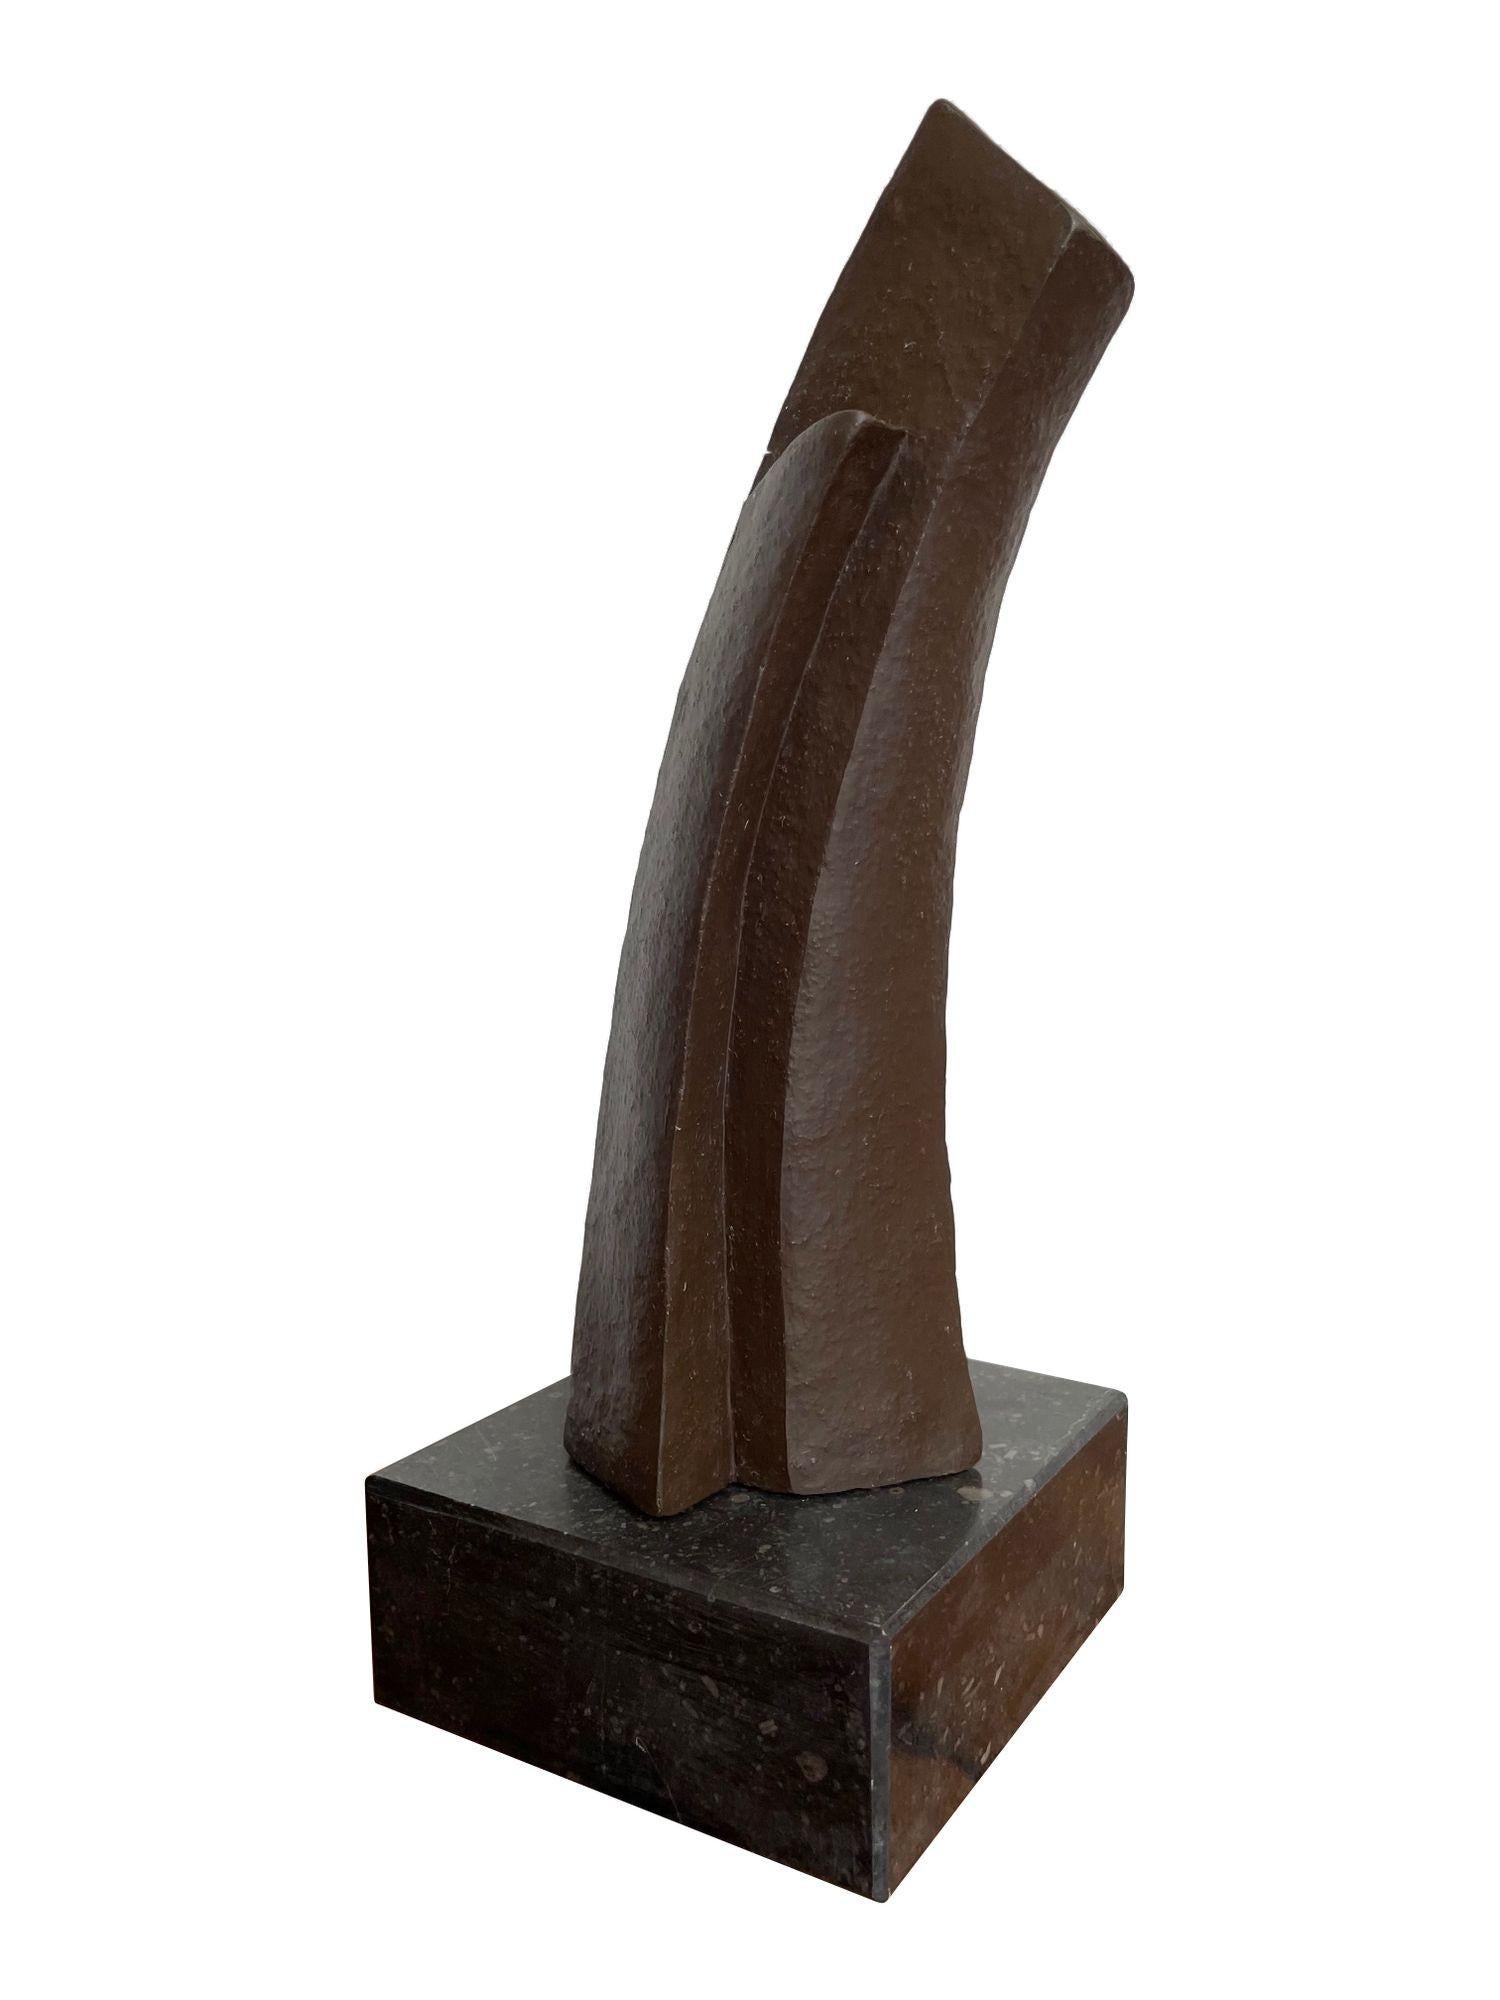 A 1960s Belgian ceramic abstract sculpture with bronze textured style finish mounted on black marble base, signed on the base 